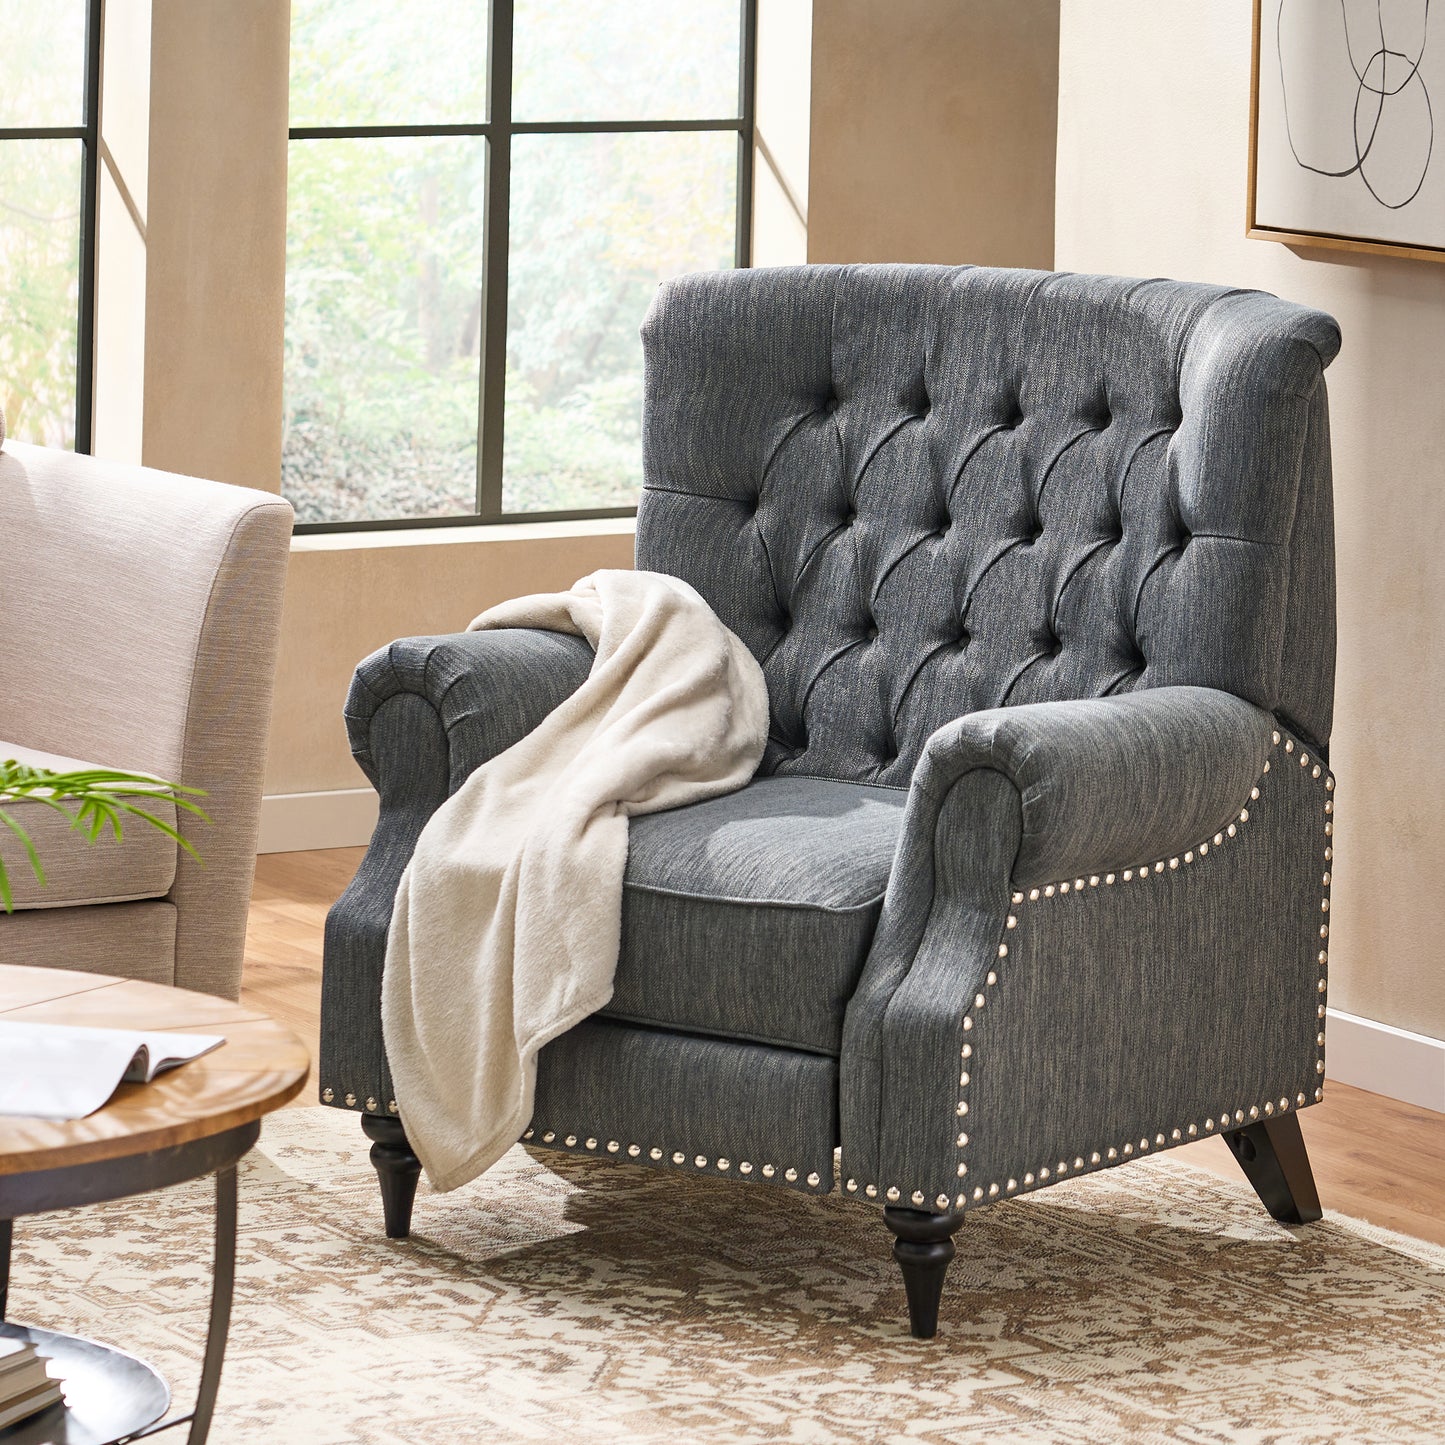 Chatau Contemporary Tufted Recliner with Nailhead Trim